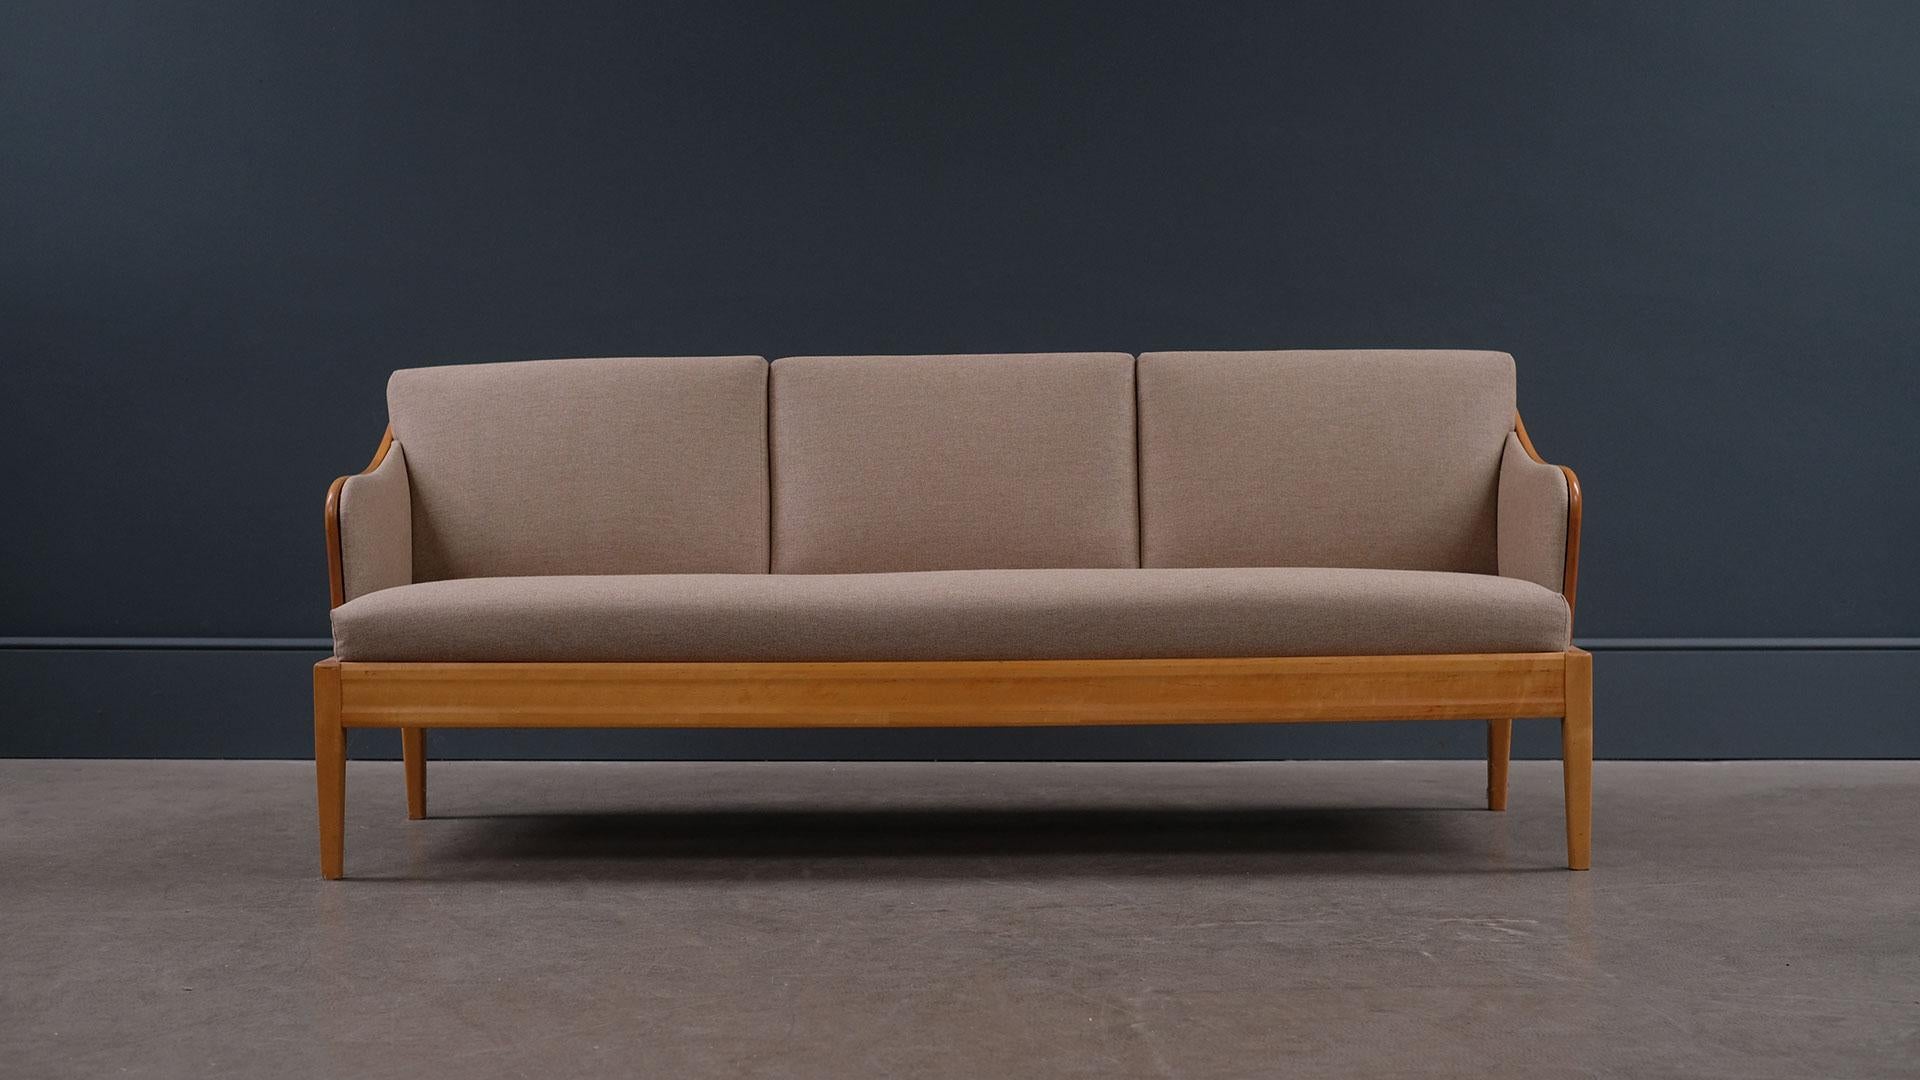 Super elegant sofa designed by Carl Malmsten, 1940s, Sweden. Lovely Birch wood frame with nice grain and warm patina. Fully refurbished and reupholstered seats. Comfortable sofa and fully sprung mattress make it useable as a daybed.